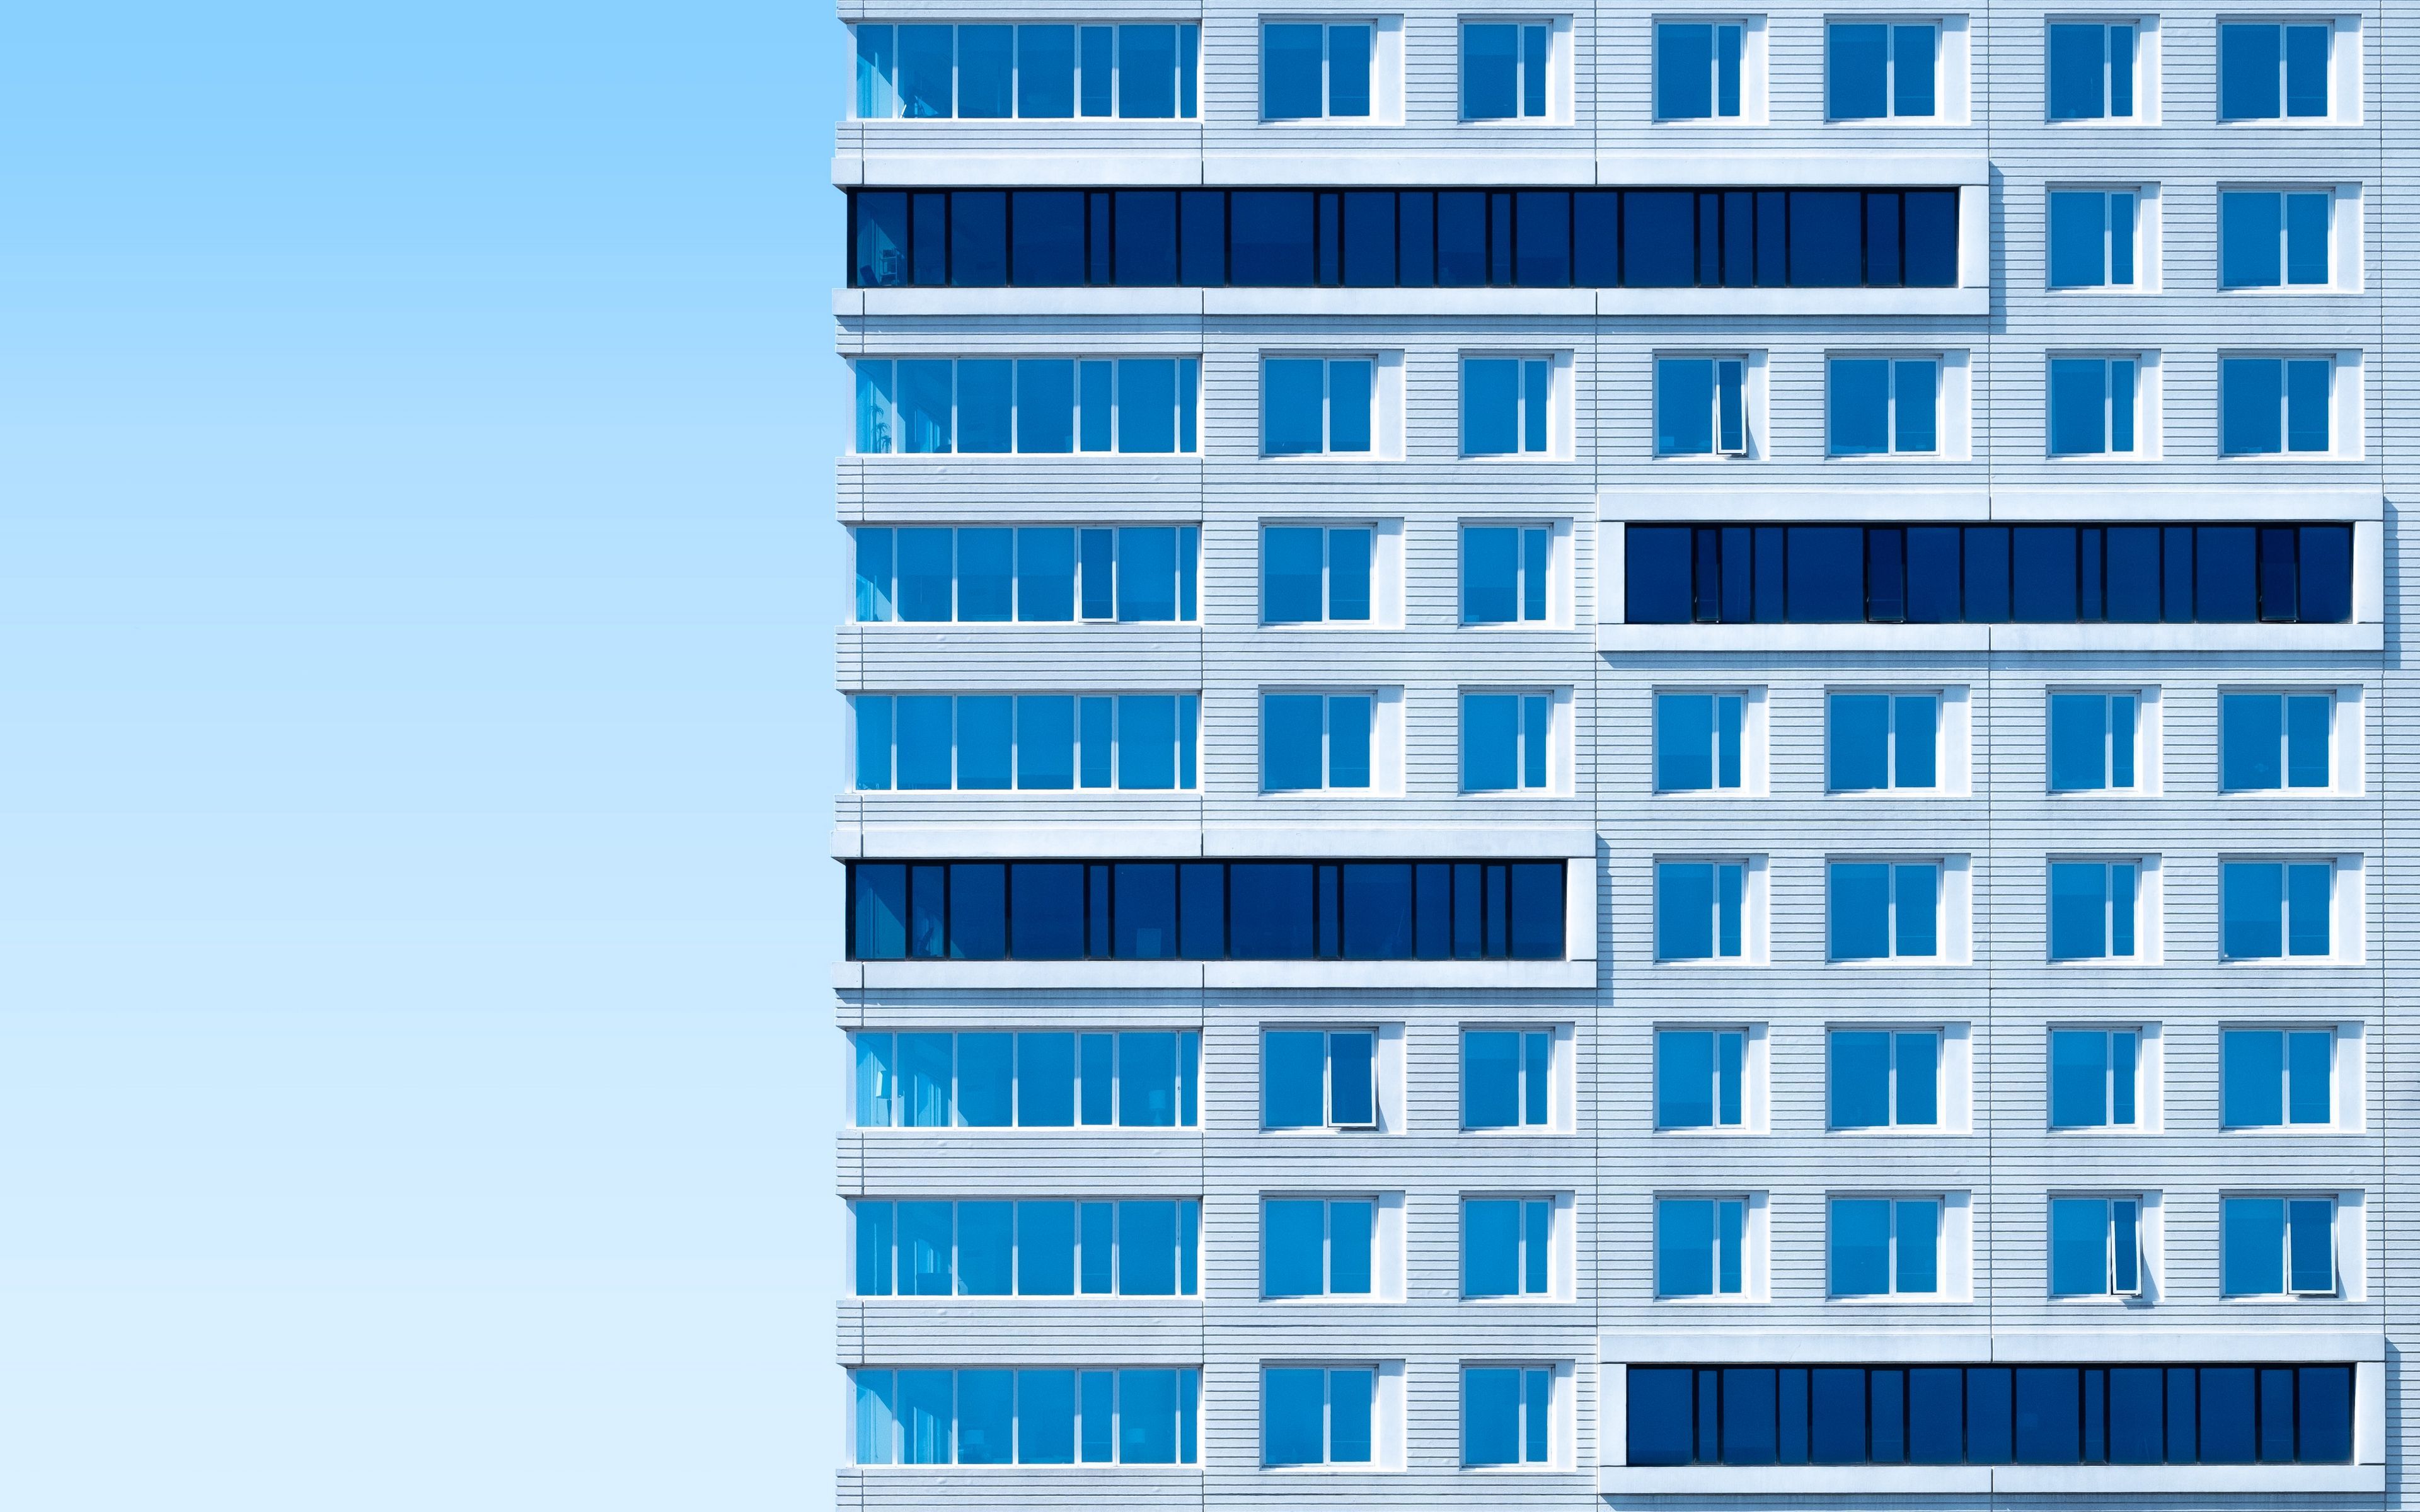 Download wallpaper 3840x2400 building, architecture, sky, minimalism, blue, aesthetic 4k ultra HD 16:10 HD background